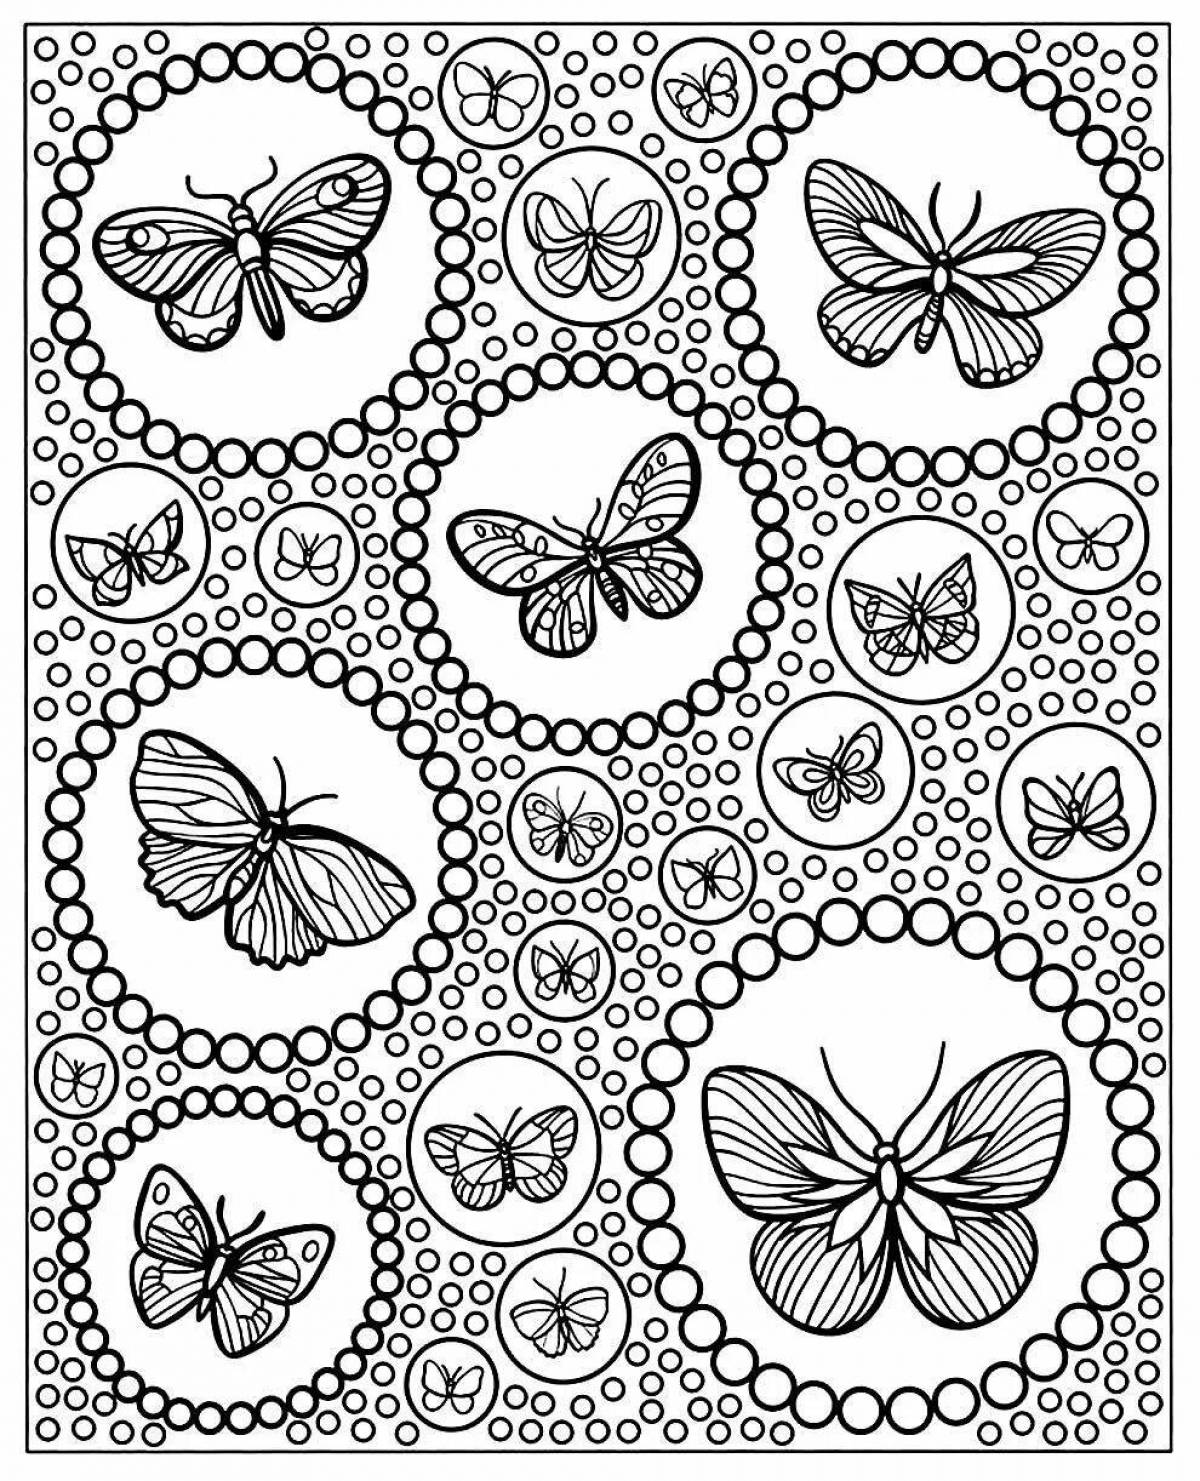 Great coloring small patterns